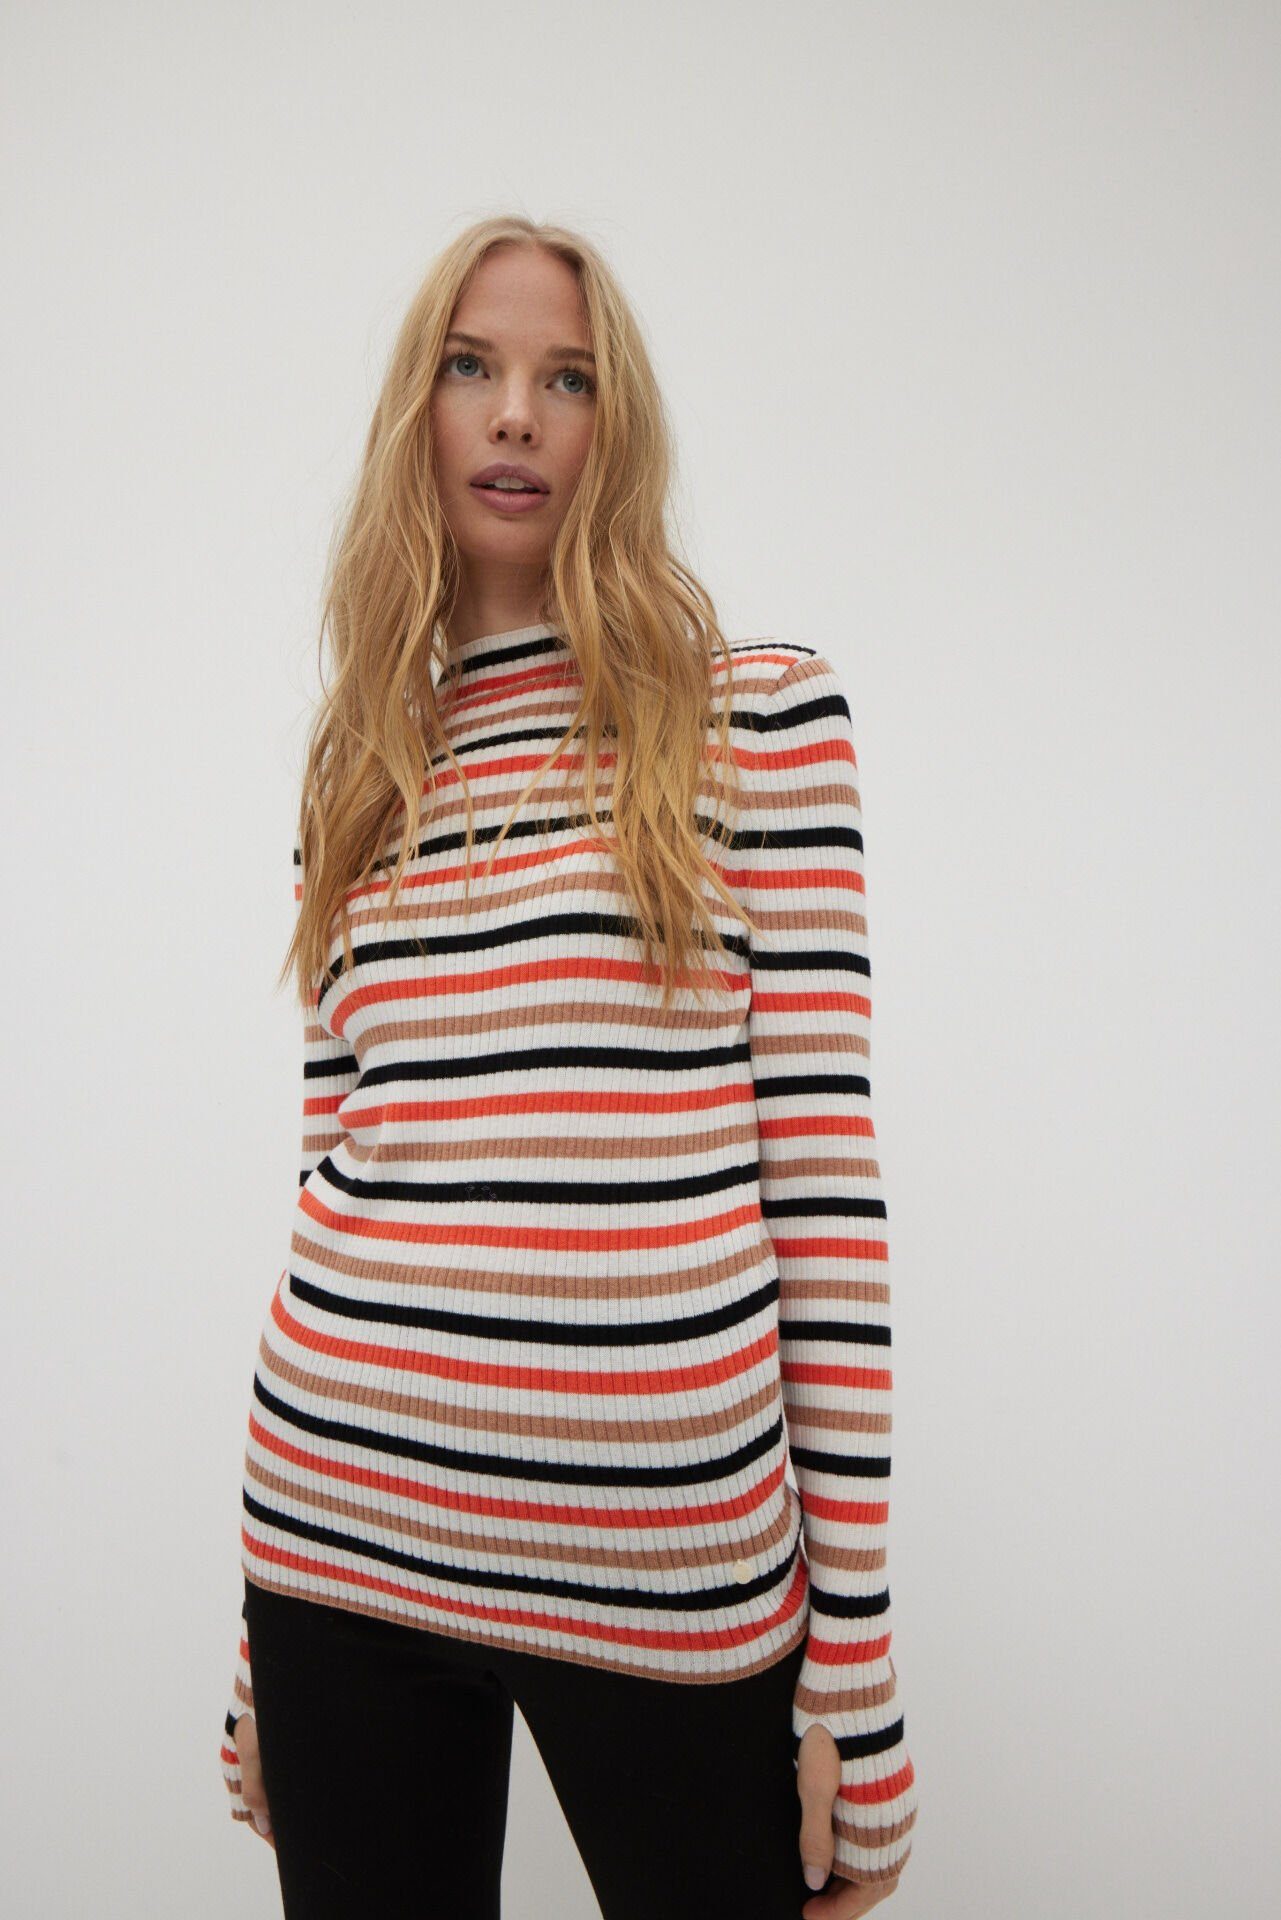 THE FASHION PEOPLE Rundhalspullover Basic Turtleneck, striped FLAME RED